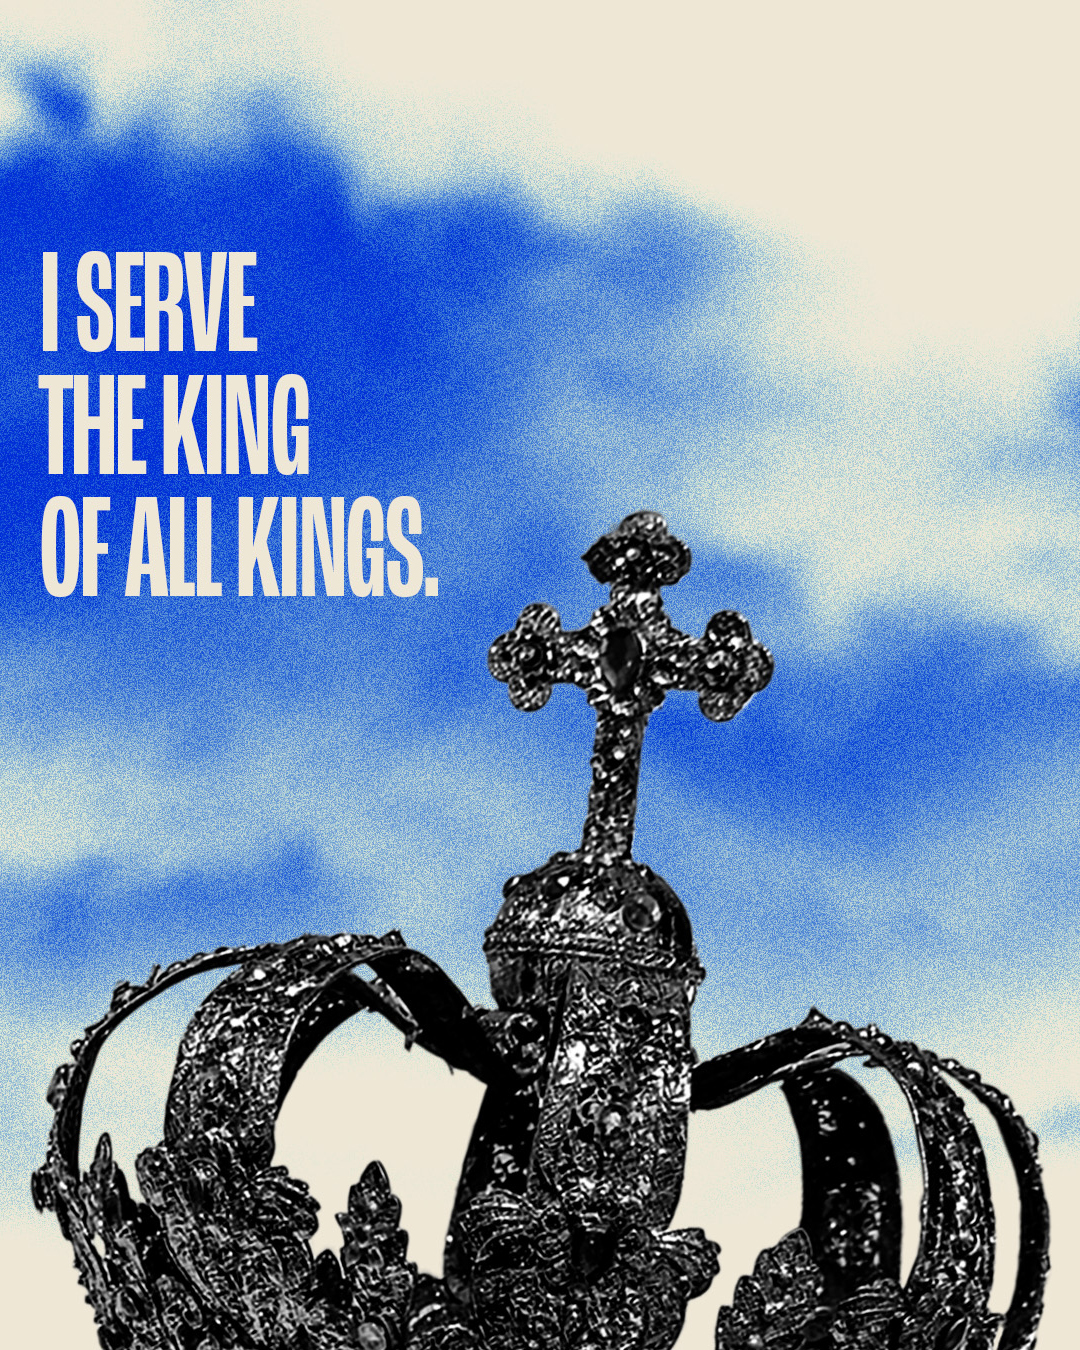 I serve the King of all Kings.